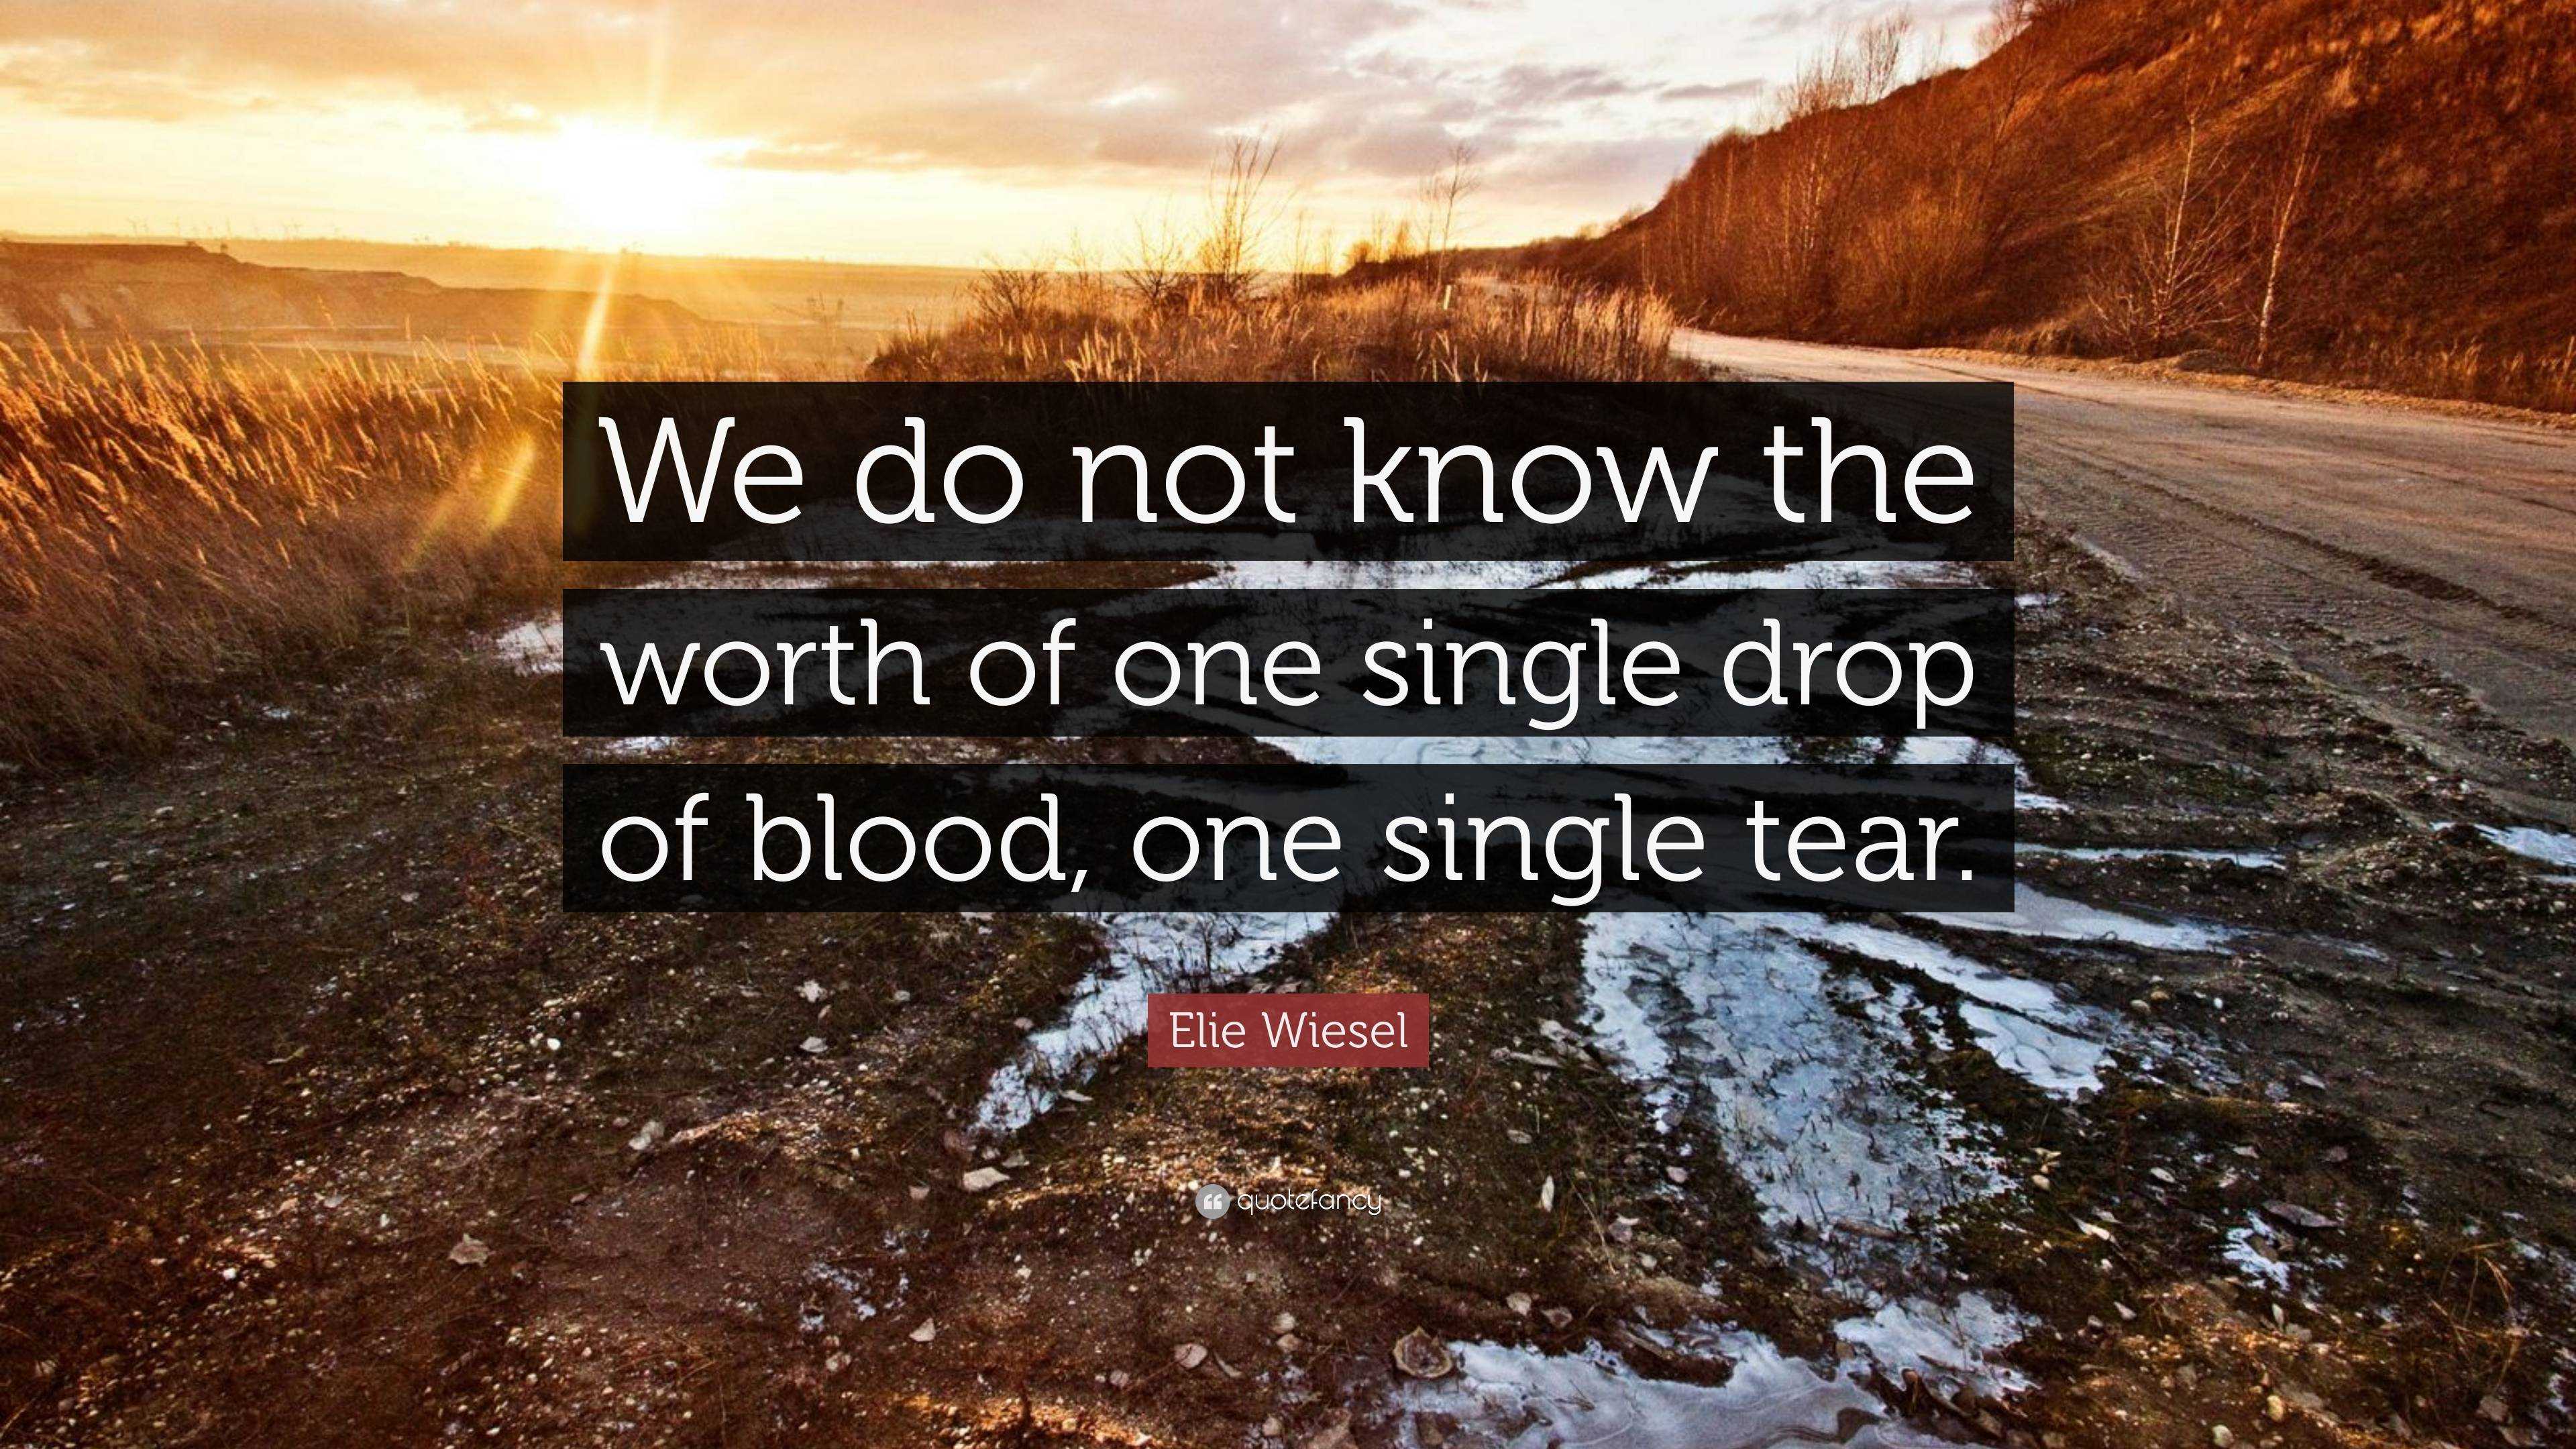 Elie Wiesel Quote: “We do not know the worth of one single drop of ...